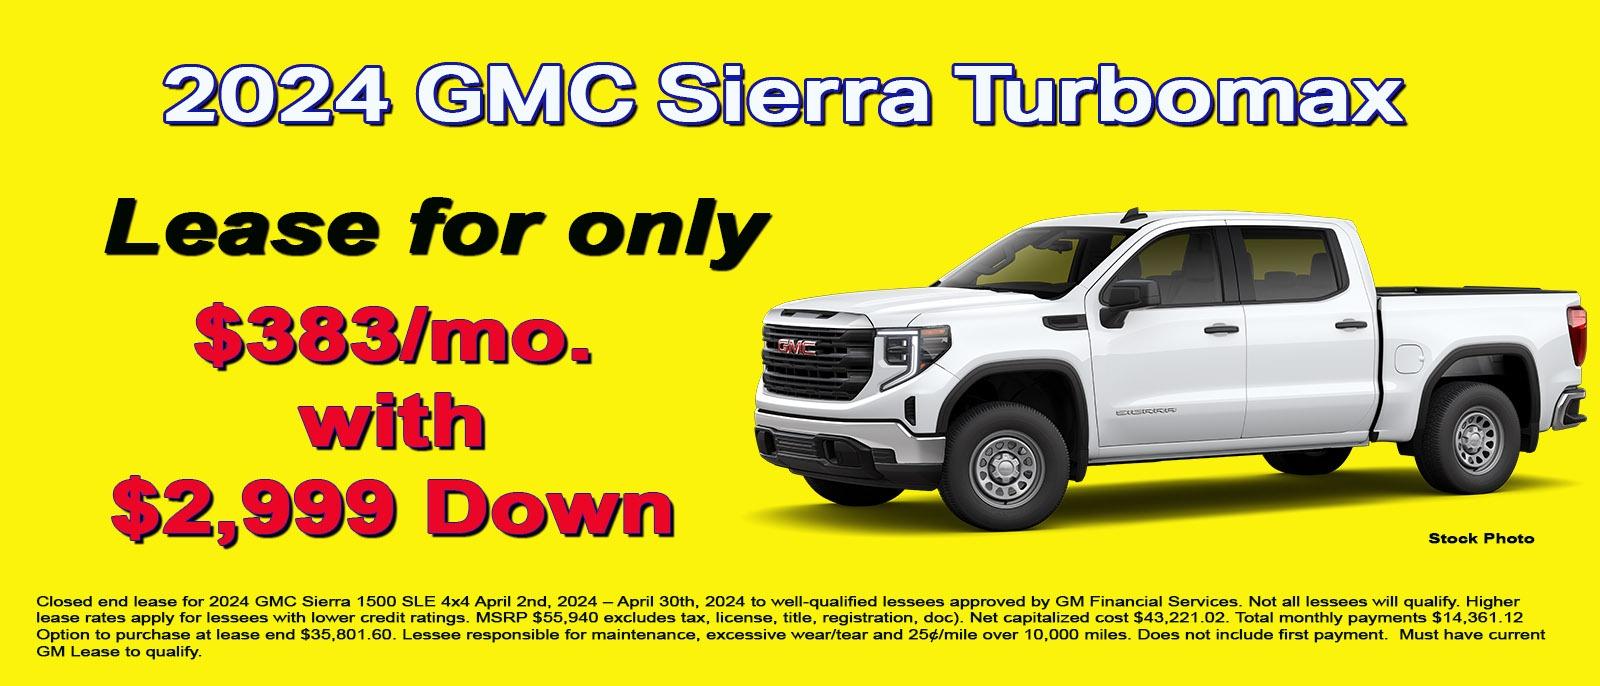 Lease your new GMC Sierra for under $400 per month